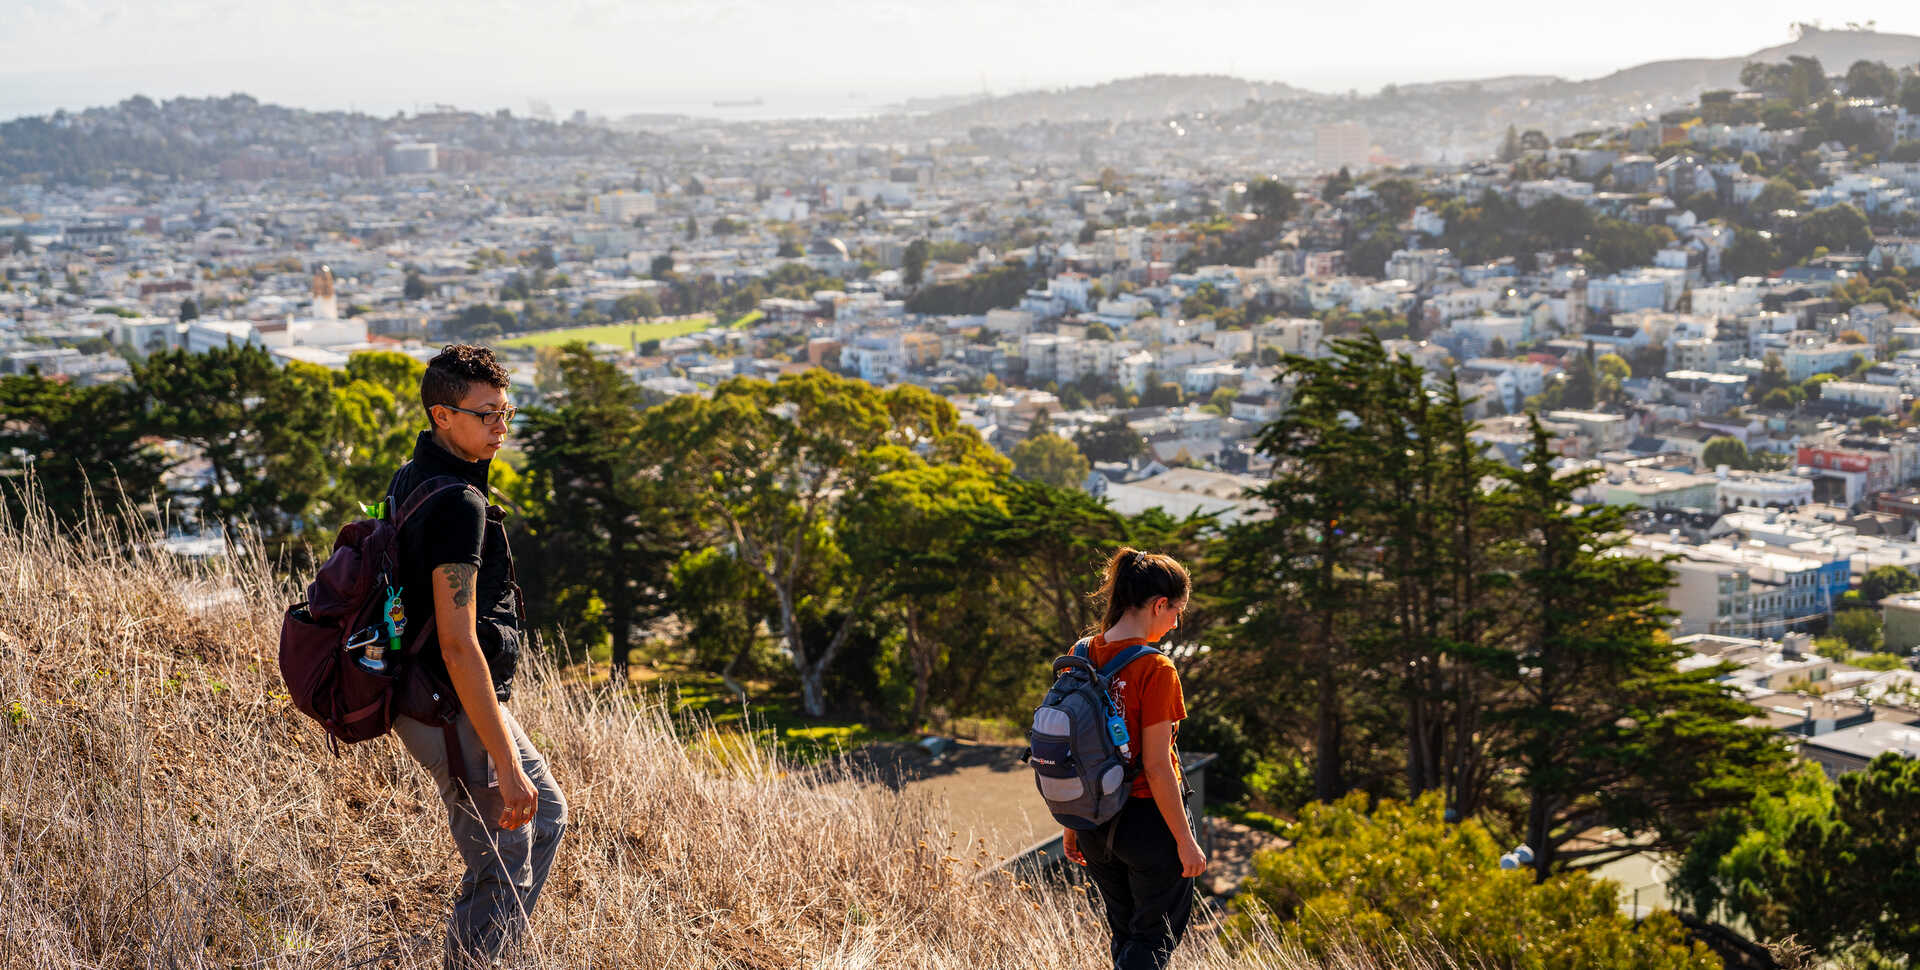 Urban ecologists Christine Wilkinson and Tali Caspi look for coyotes on Bernal Hill in San Francisco. Photo by Gayle Laird